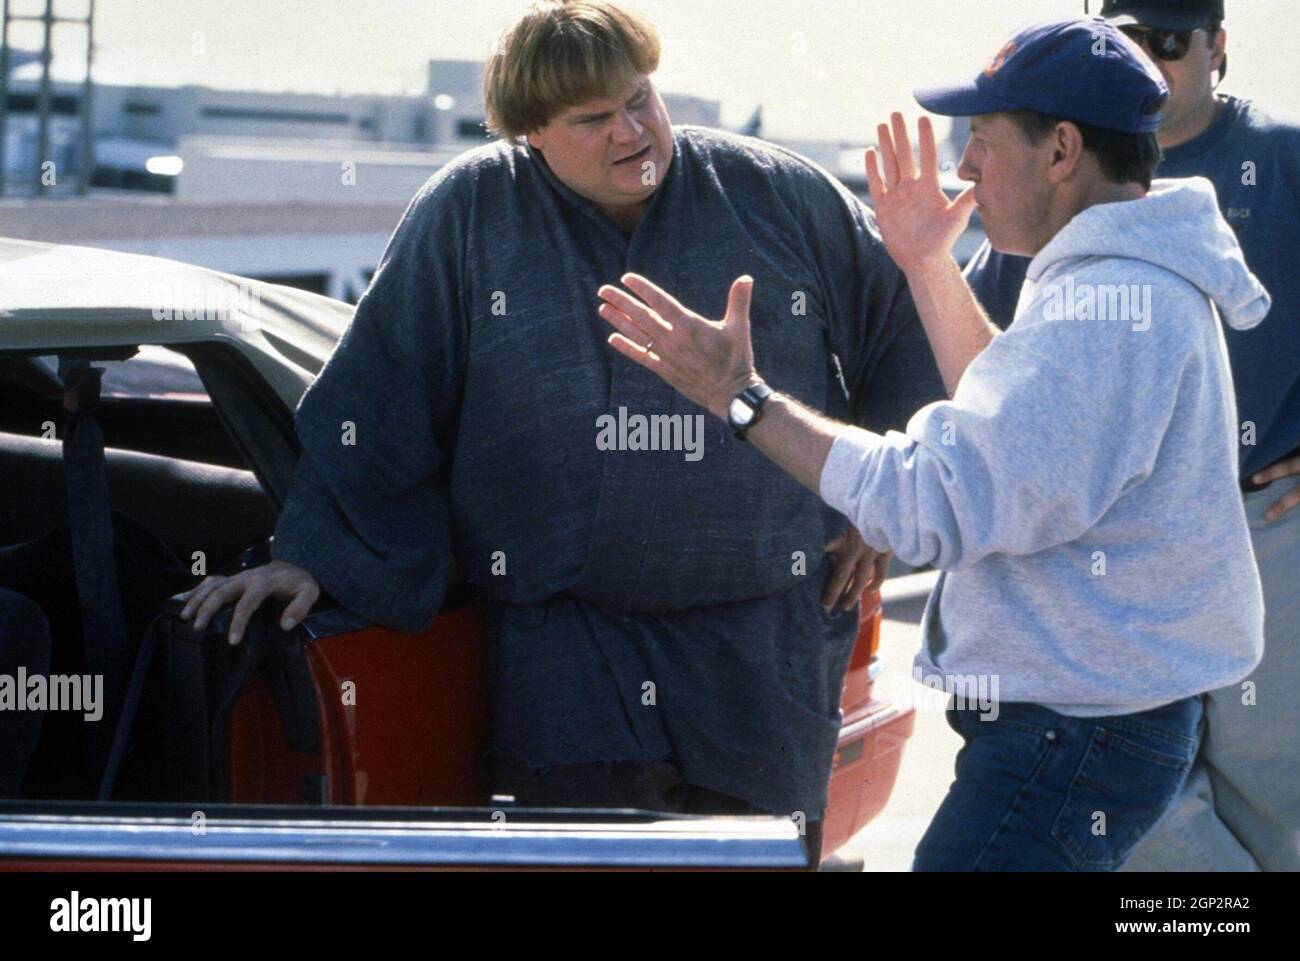 BEVERLY HILLS NINJA, from left: Chris Farley, director Dennis Dugan, on set, 1997. © TriStar Pictures /courtesy Everett Collection Stock Photo